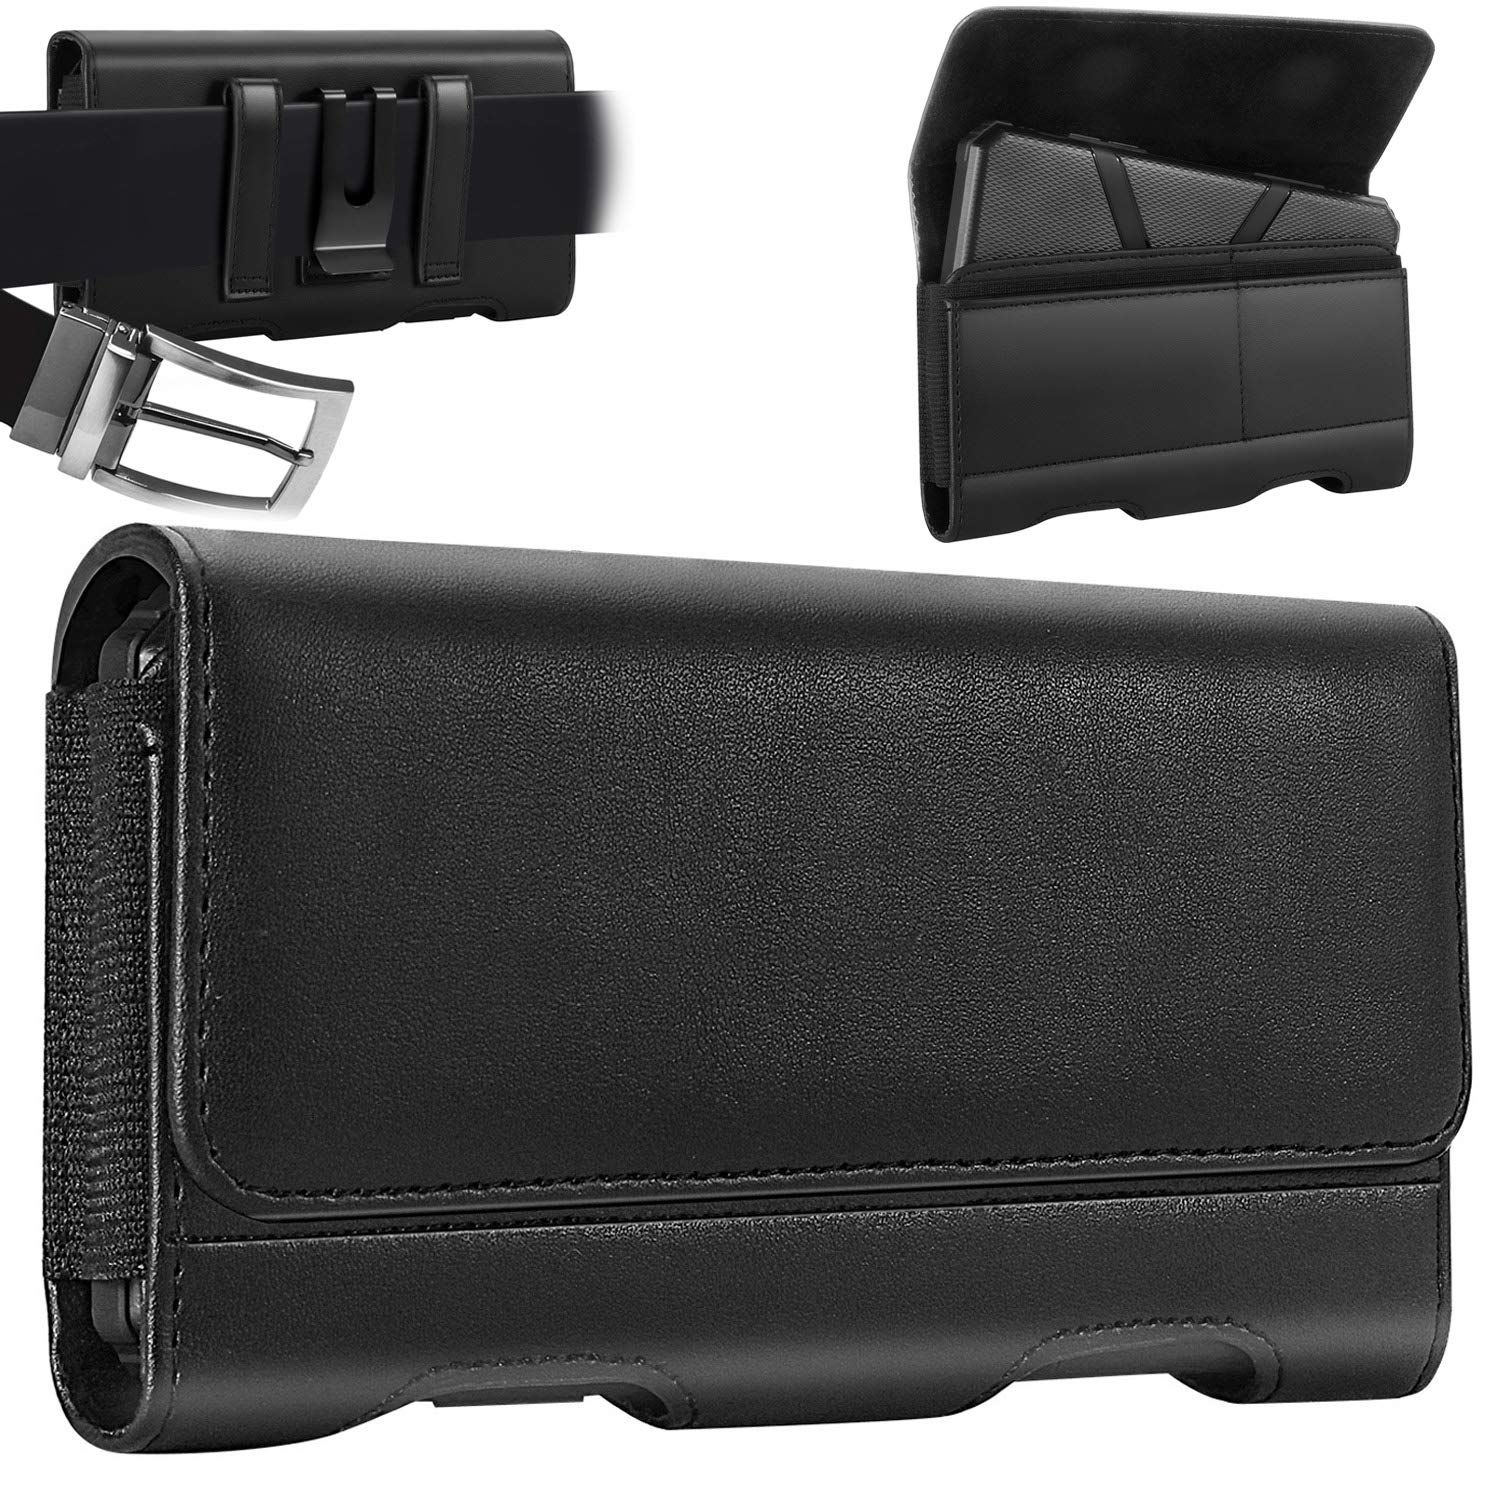 Mopaclle Phone Holster for Galaxy Note 20 Ultra S23 Ultra, Premium Leather Belt Clip Case Holster Pouch Sleeve Phone with ID Card Holder for Samsung Galaxy Note 8 9 (Fits Phone w/Otterbox Case On)